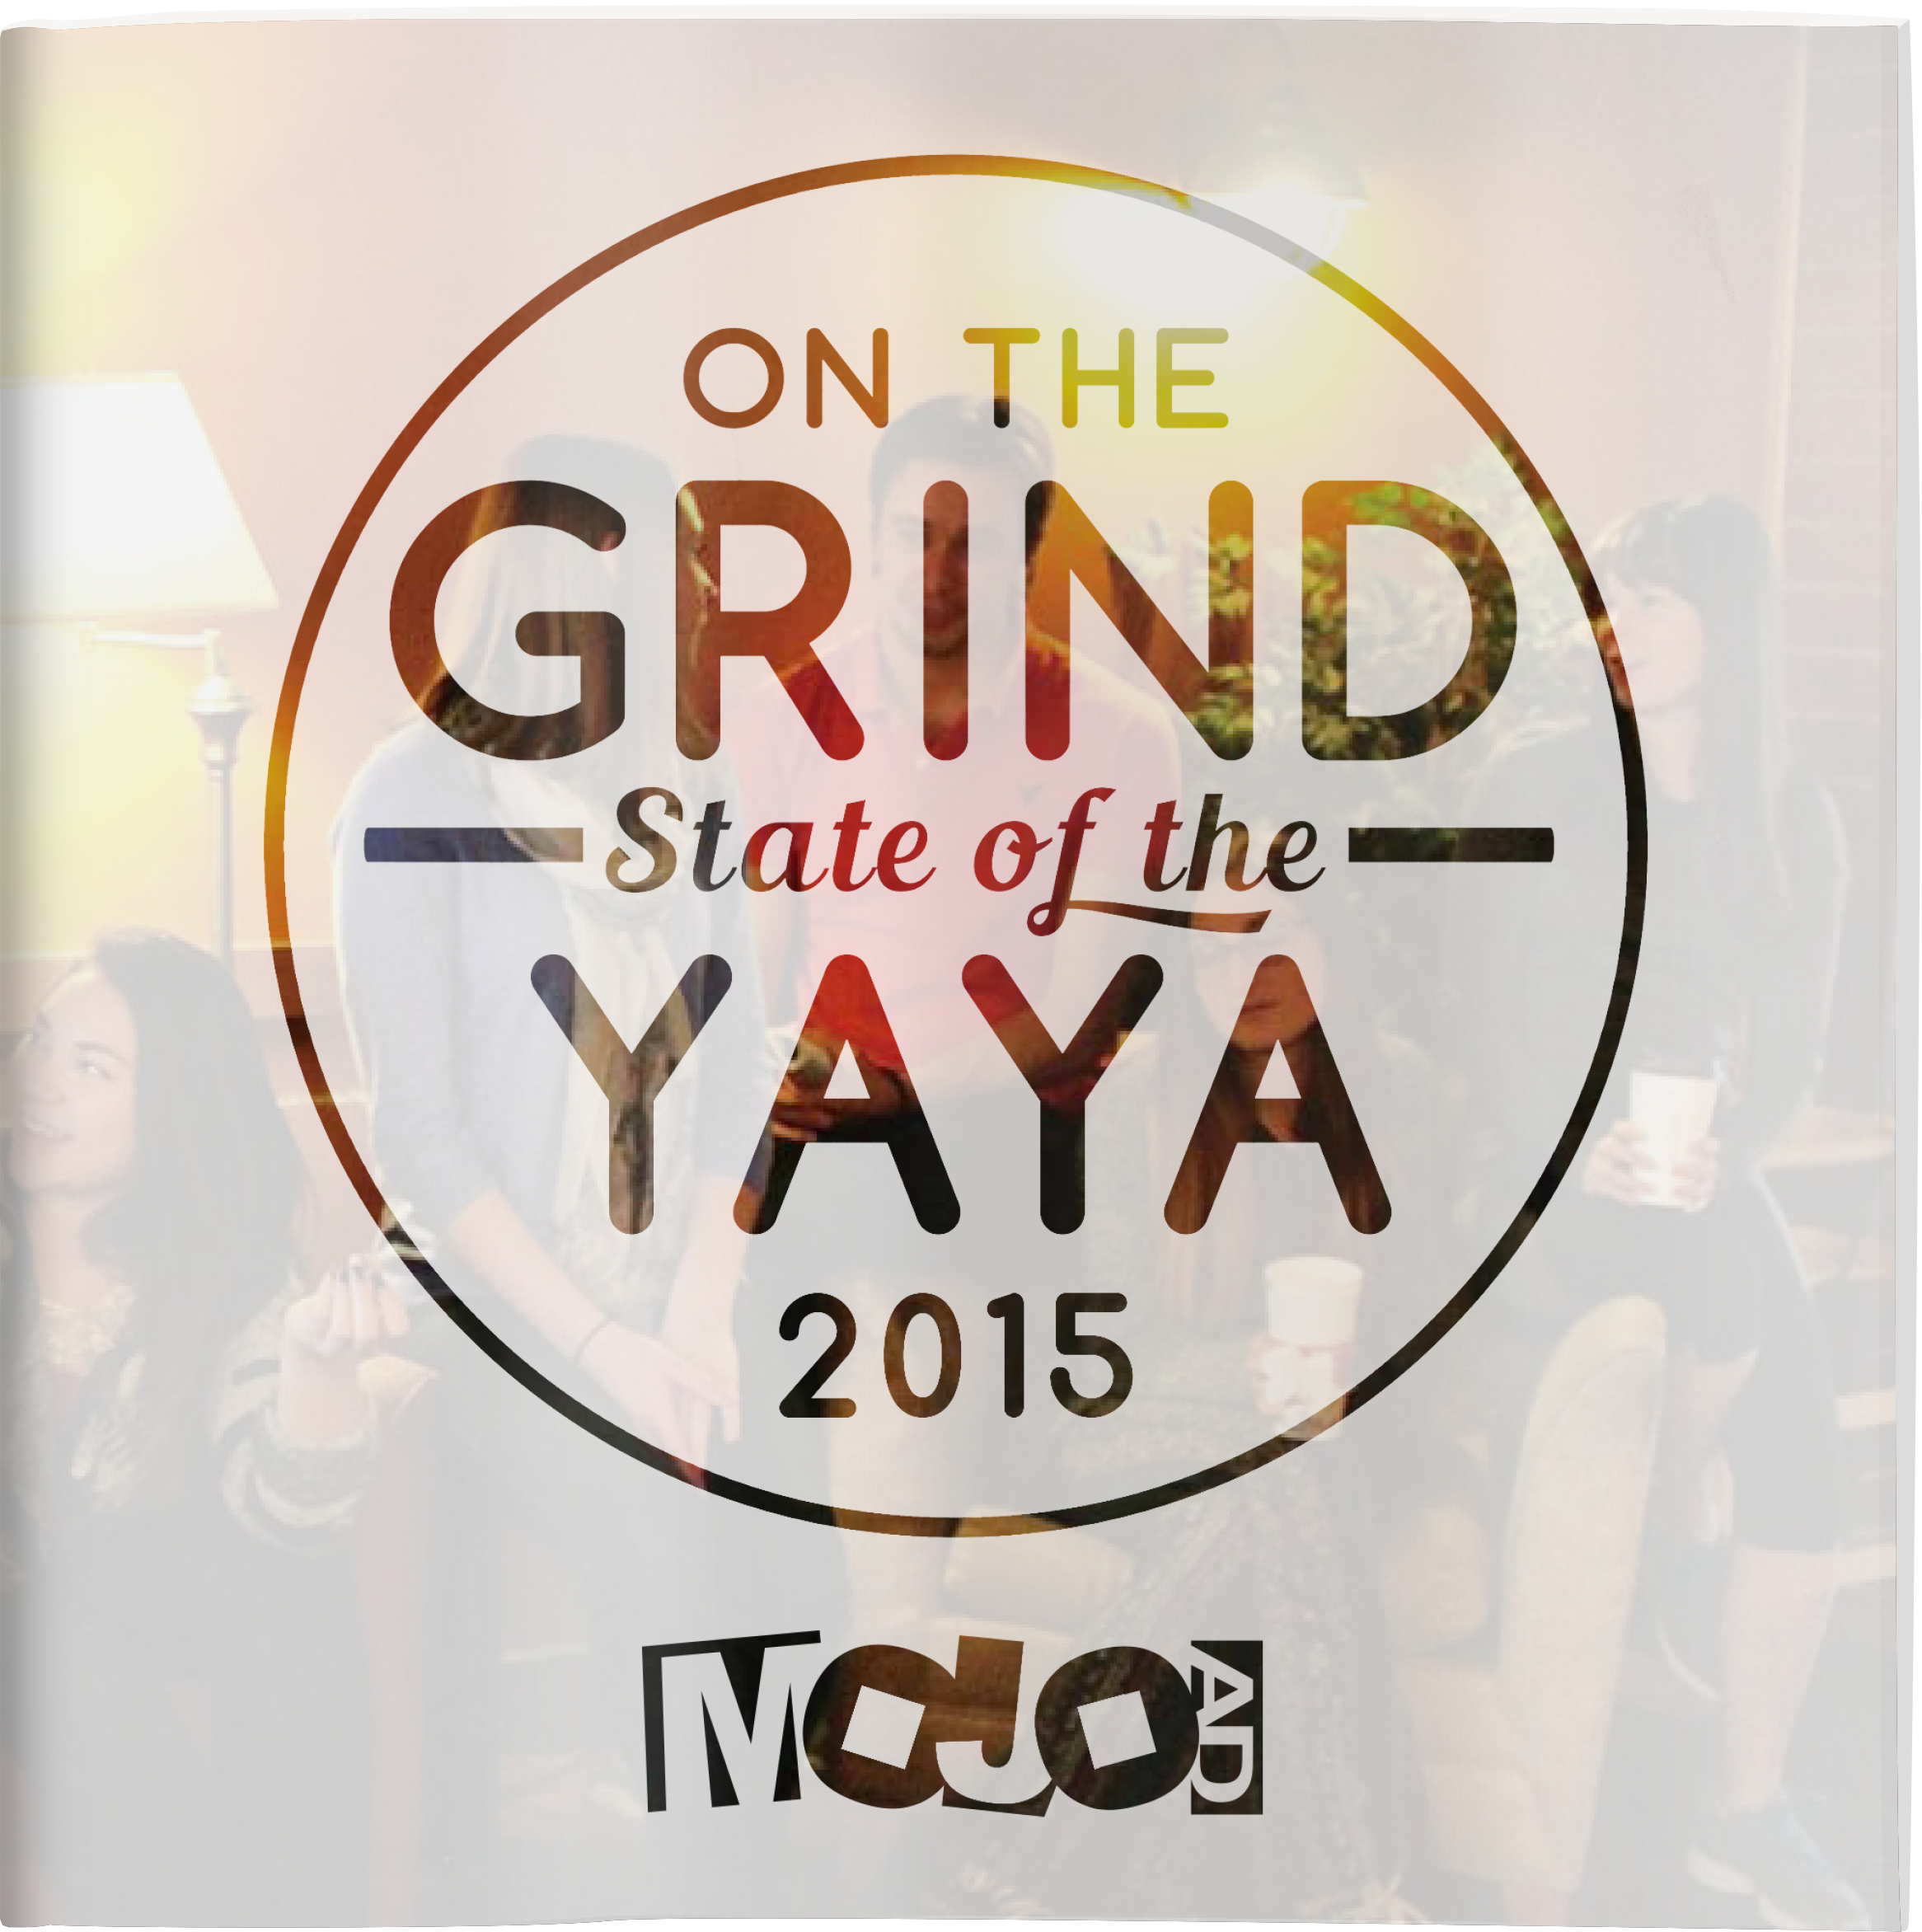 2015 State of the YAYA - On The Grind